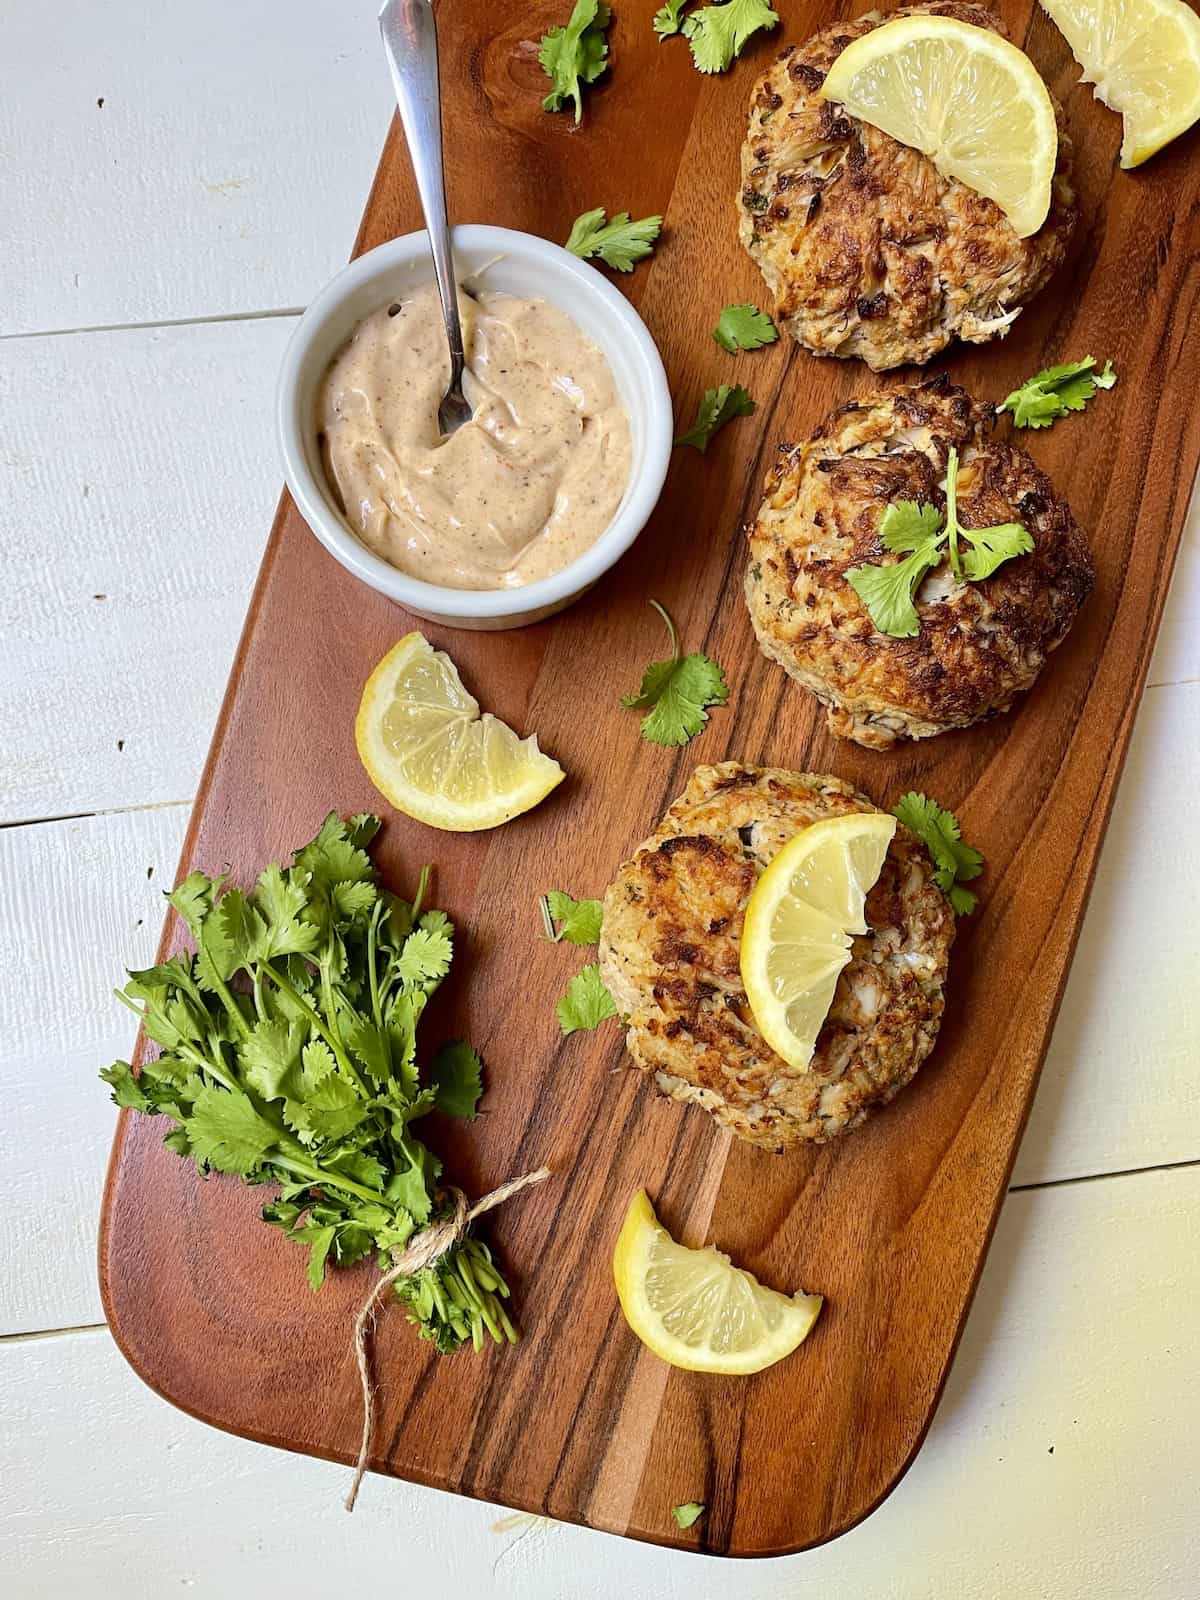 Crab cakes with lemon and parsley on a wood board.